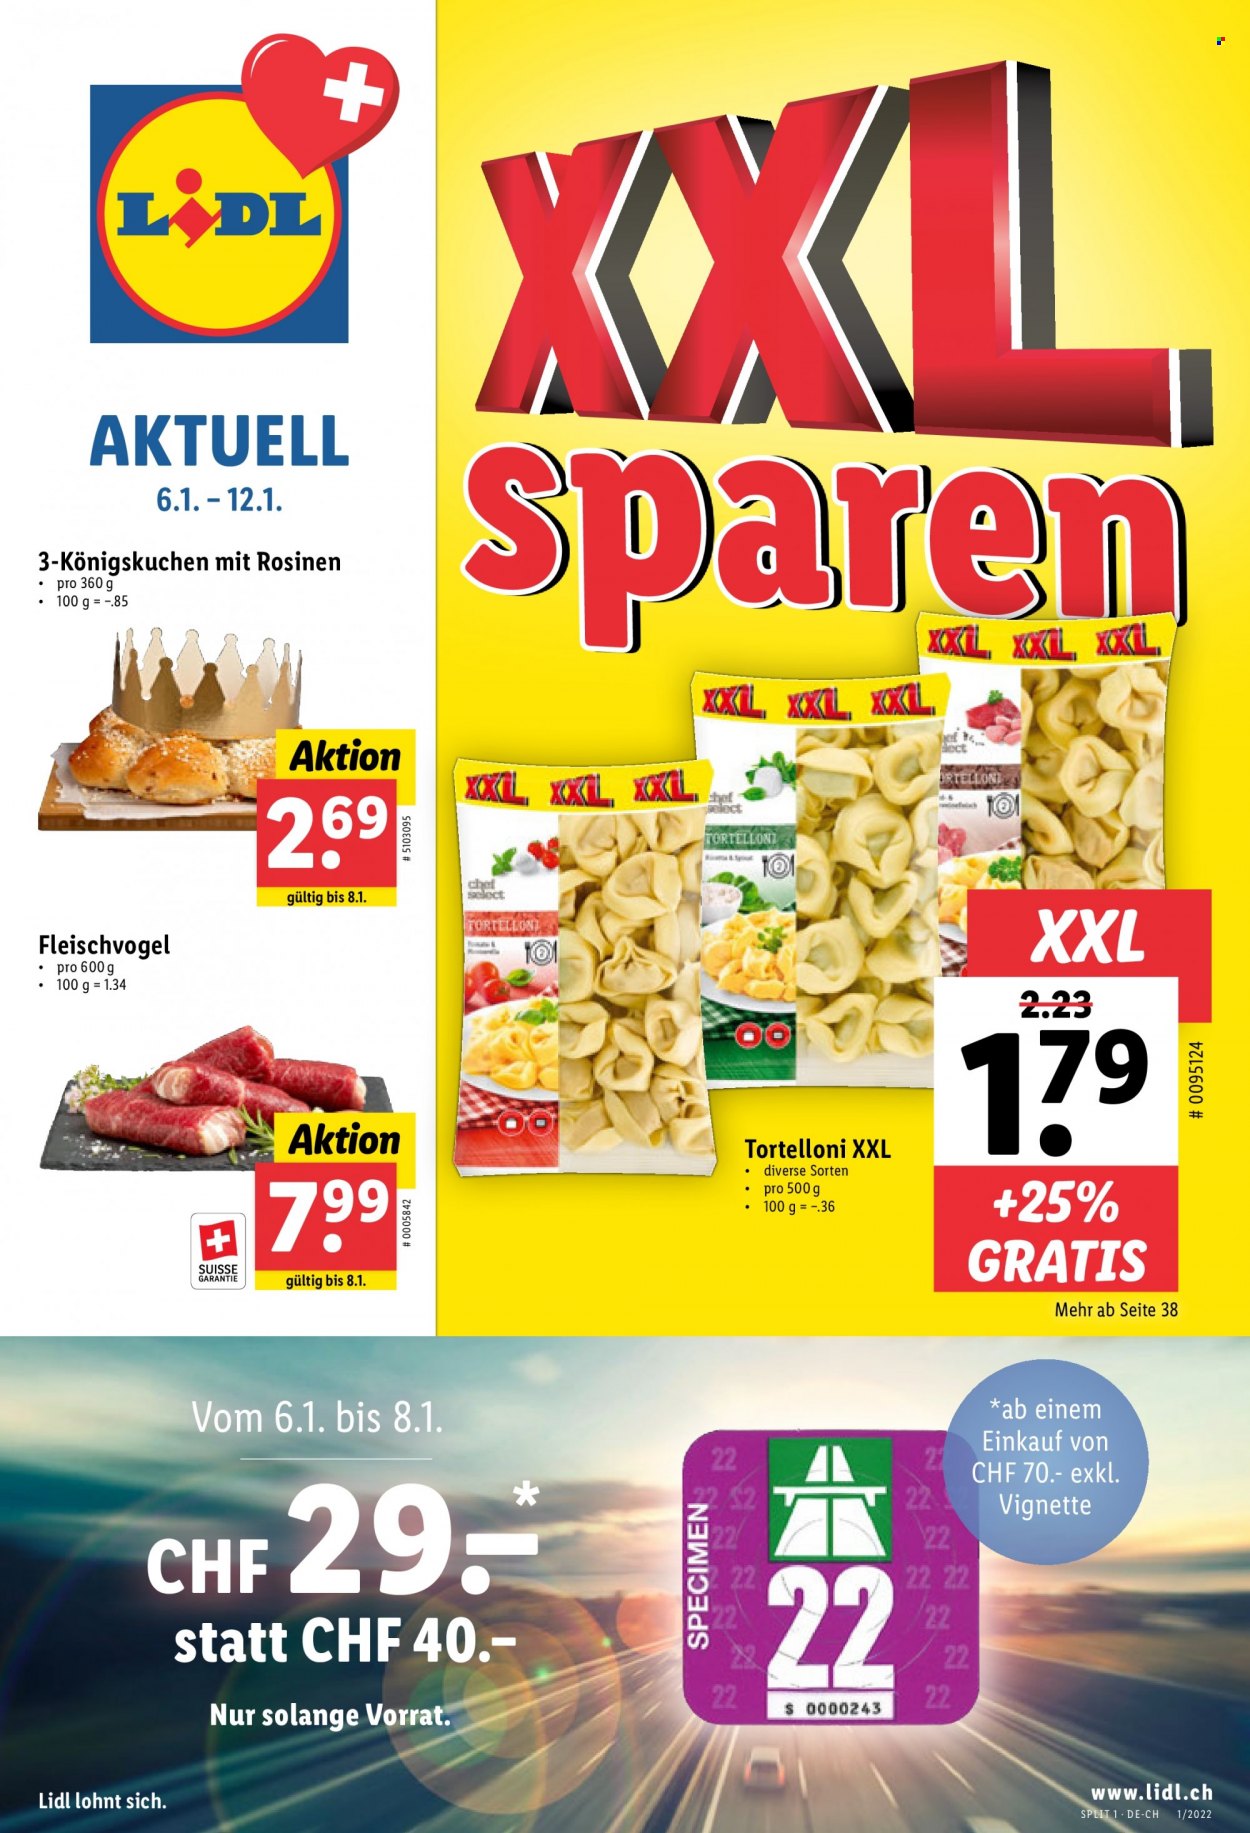 Catalogue Lidl - 6.1.2022 - 12.1.2022. Page 1.